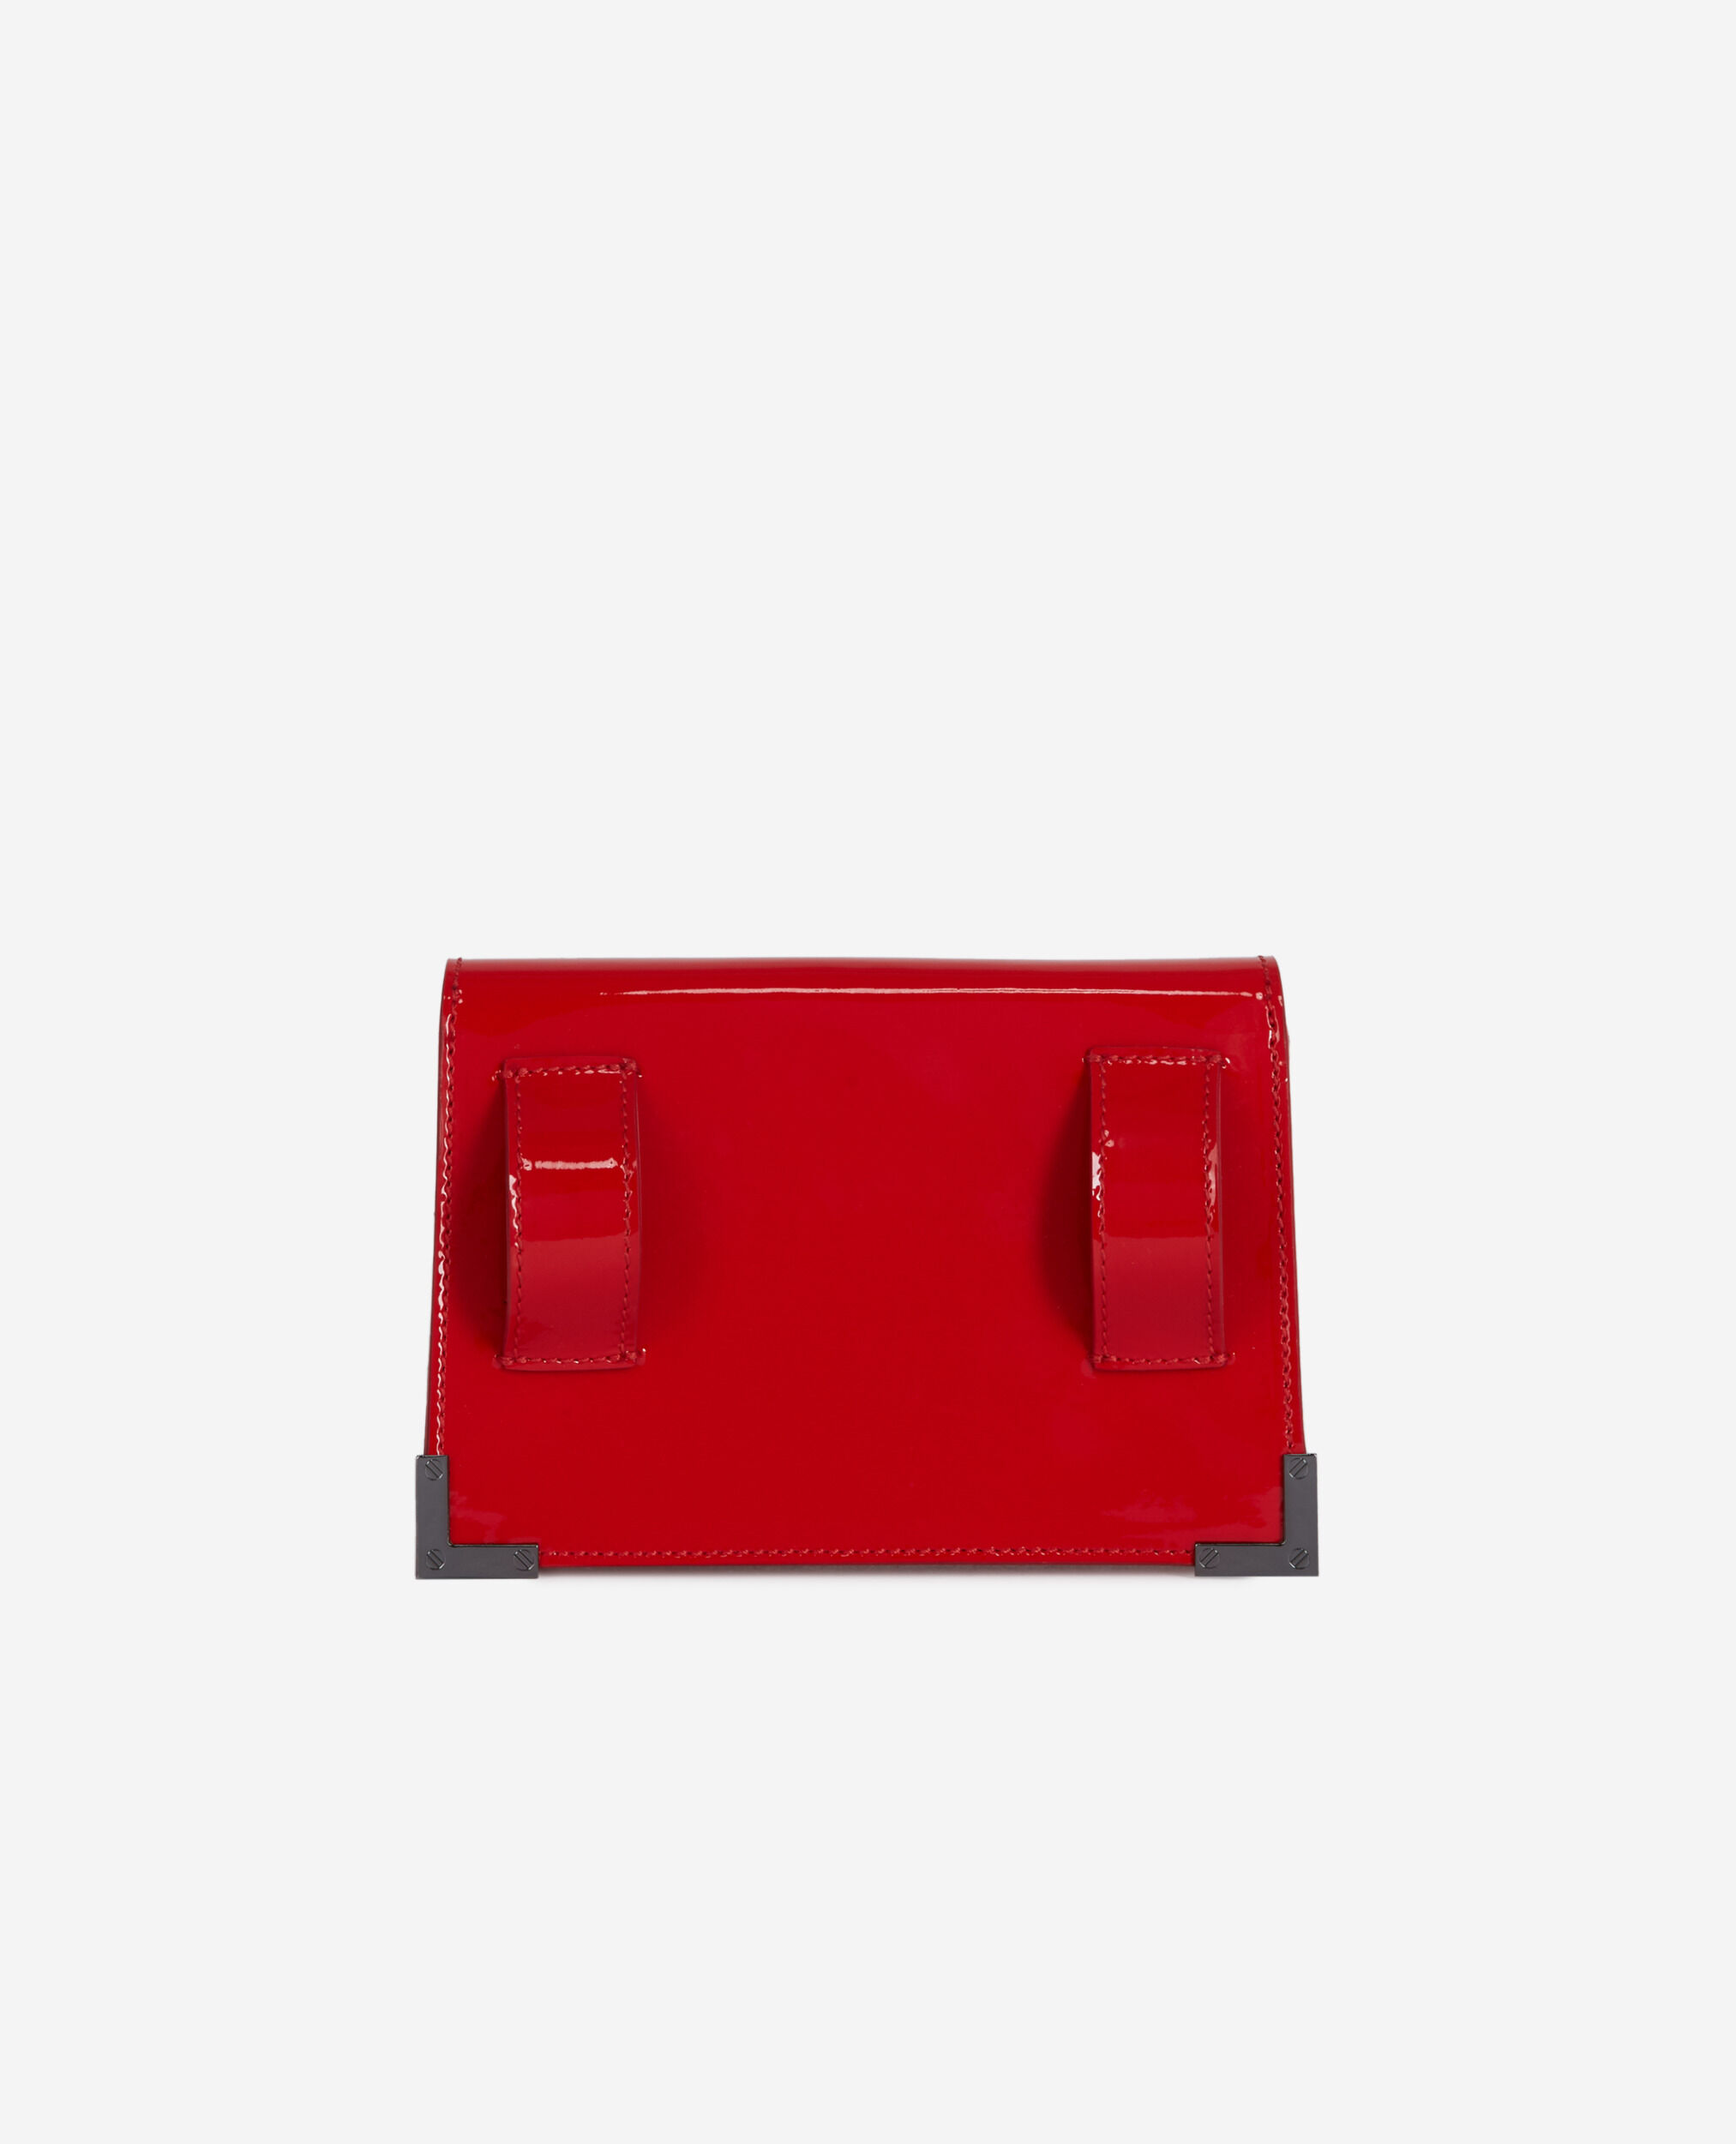 Emily belt in red leather, RED, hi-res image number null